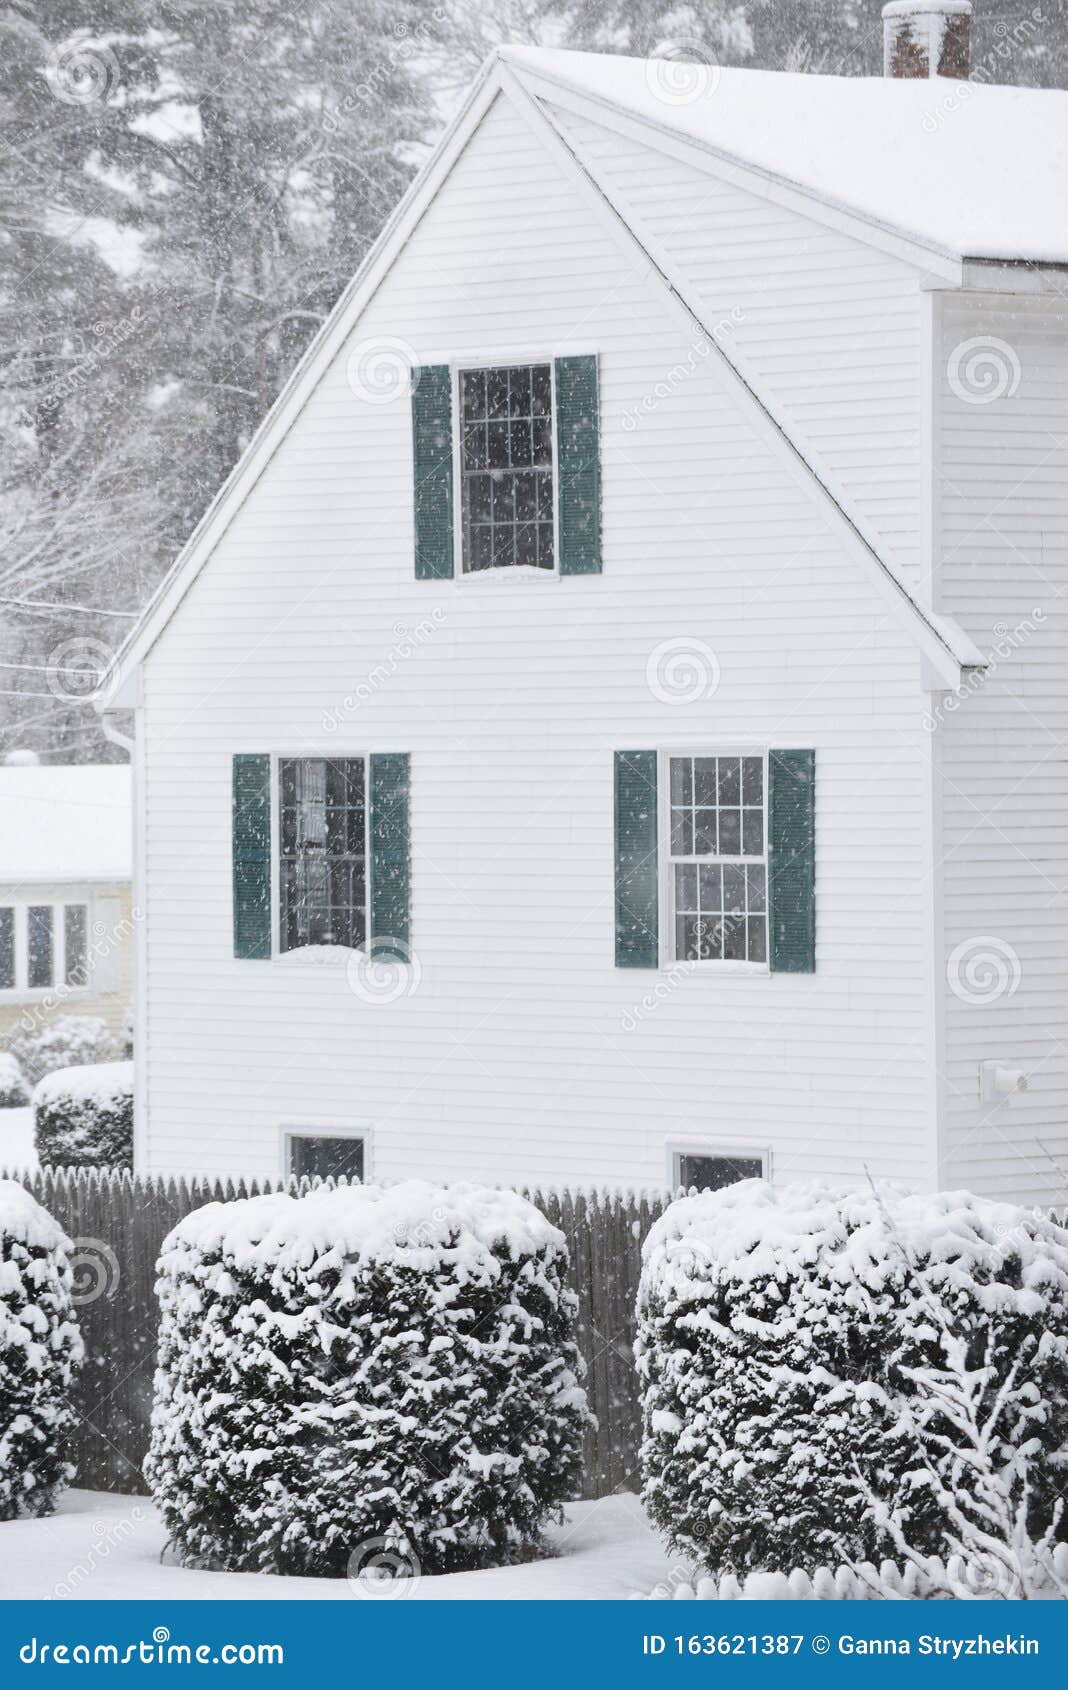 A Small Cozy House Covered With Snow During A Snowfall. Stock Image